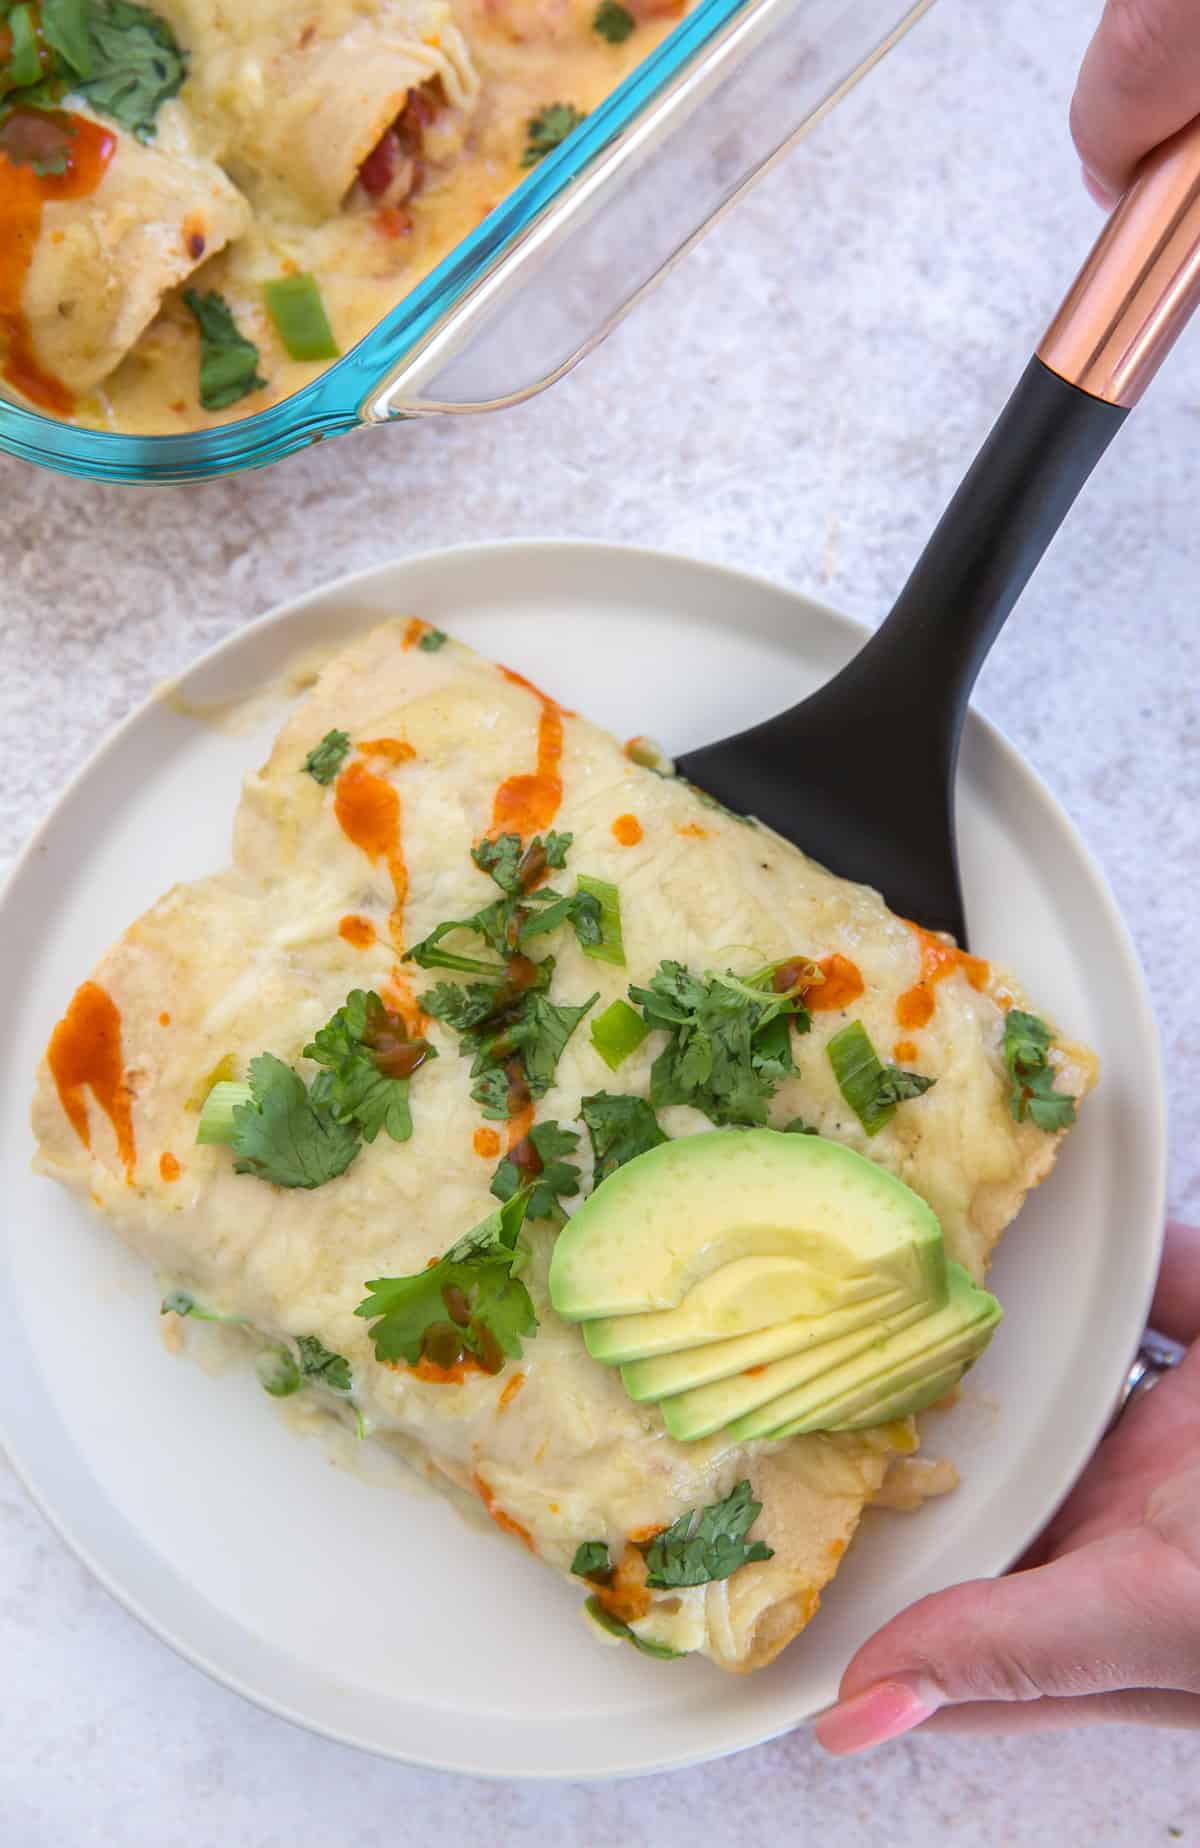 A hand holding a spatula places two enchiladas on a white serving plate.